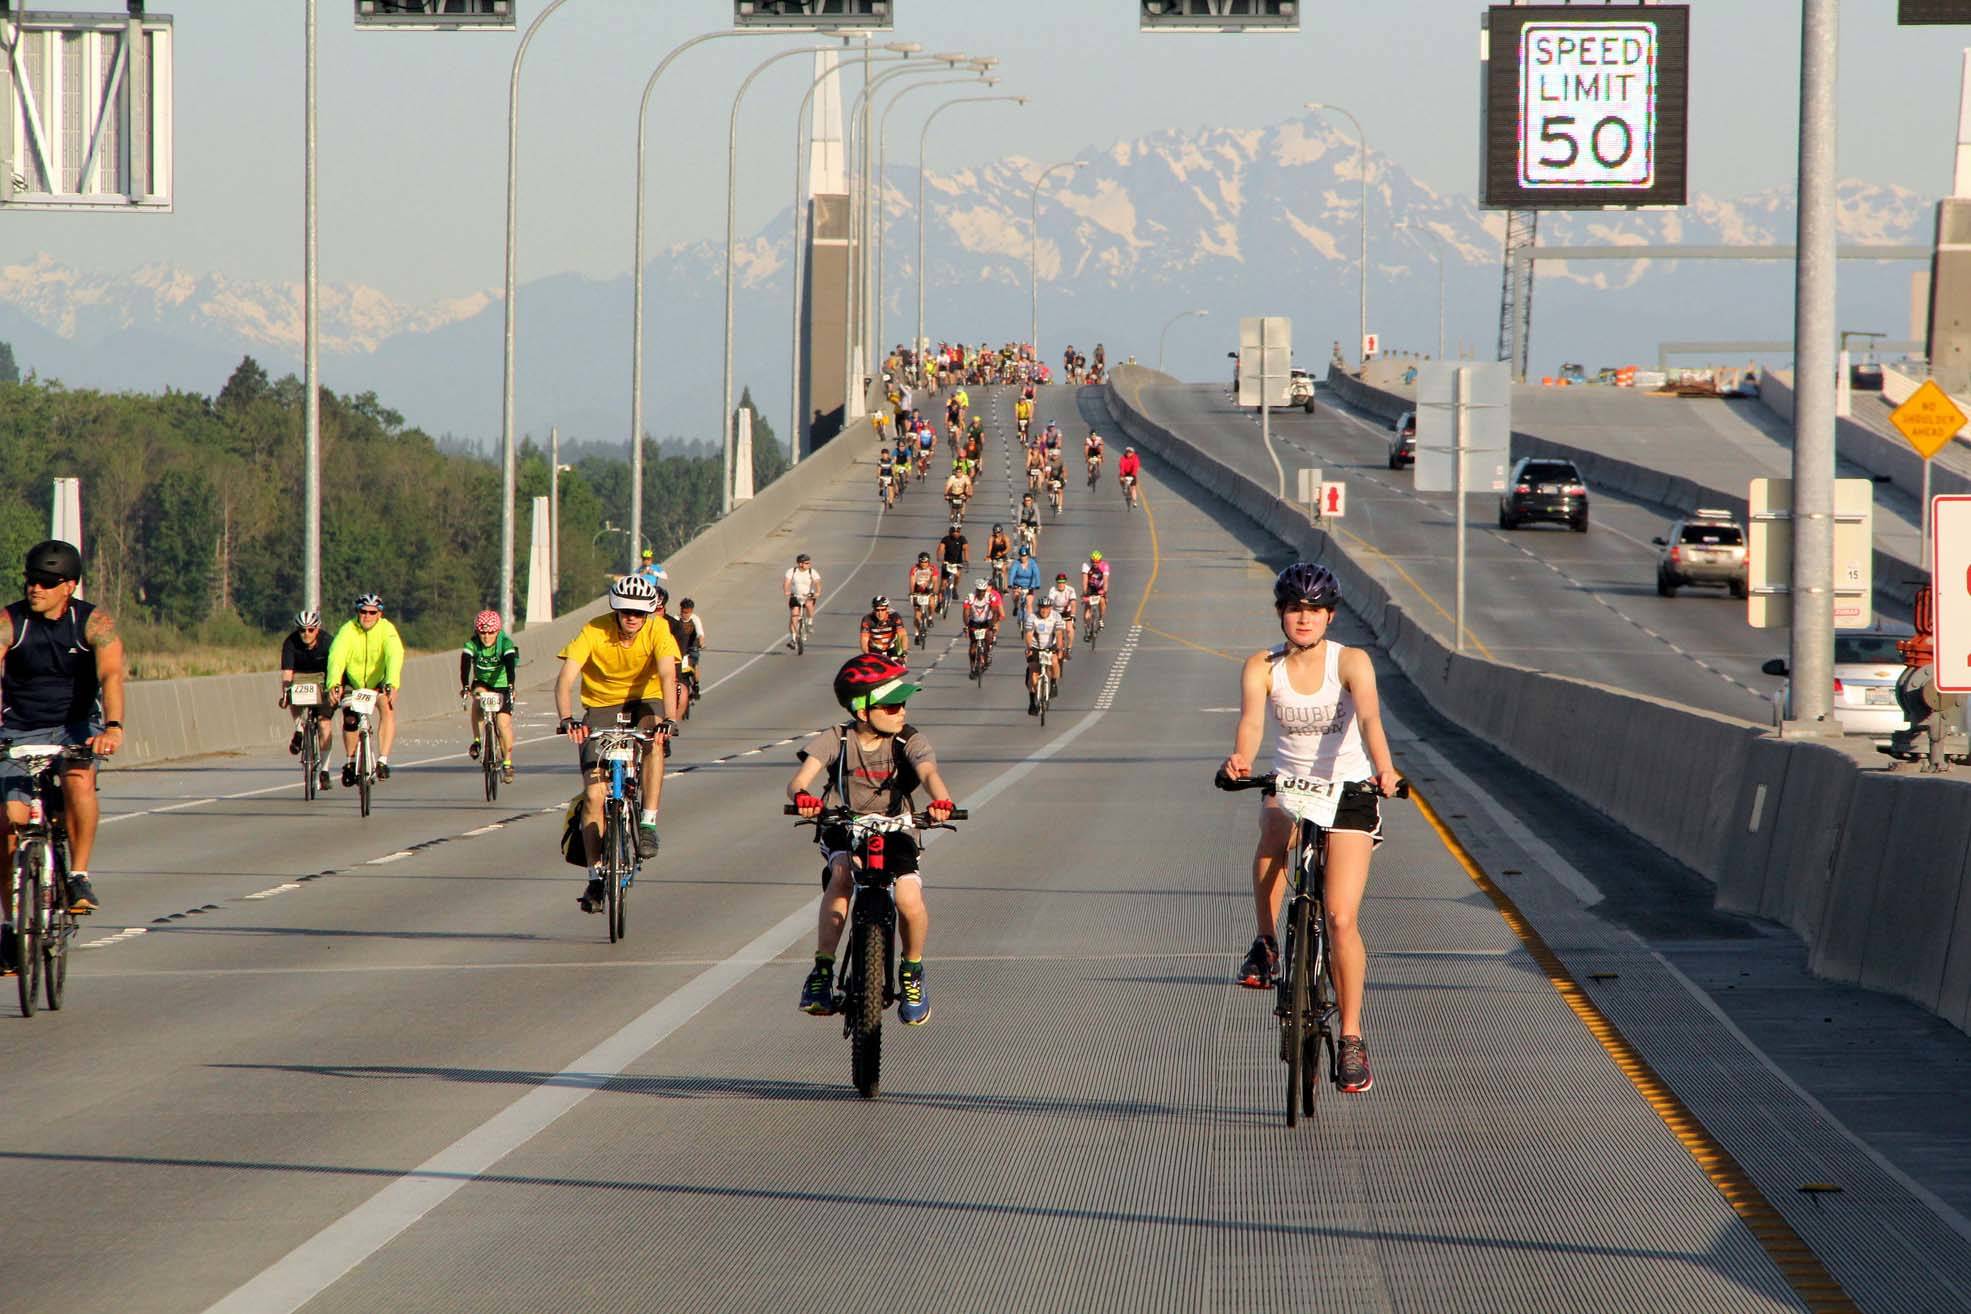 Riders on the 520 Bridge during an Emerald City Ride. Photo courtesy of Cascade Bicycle Club